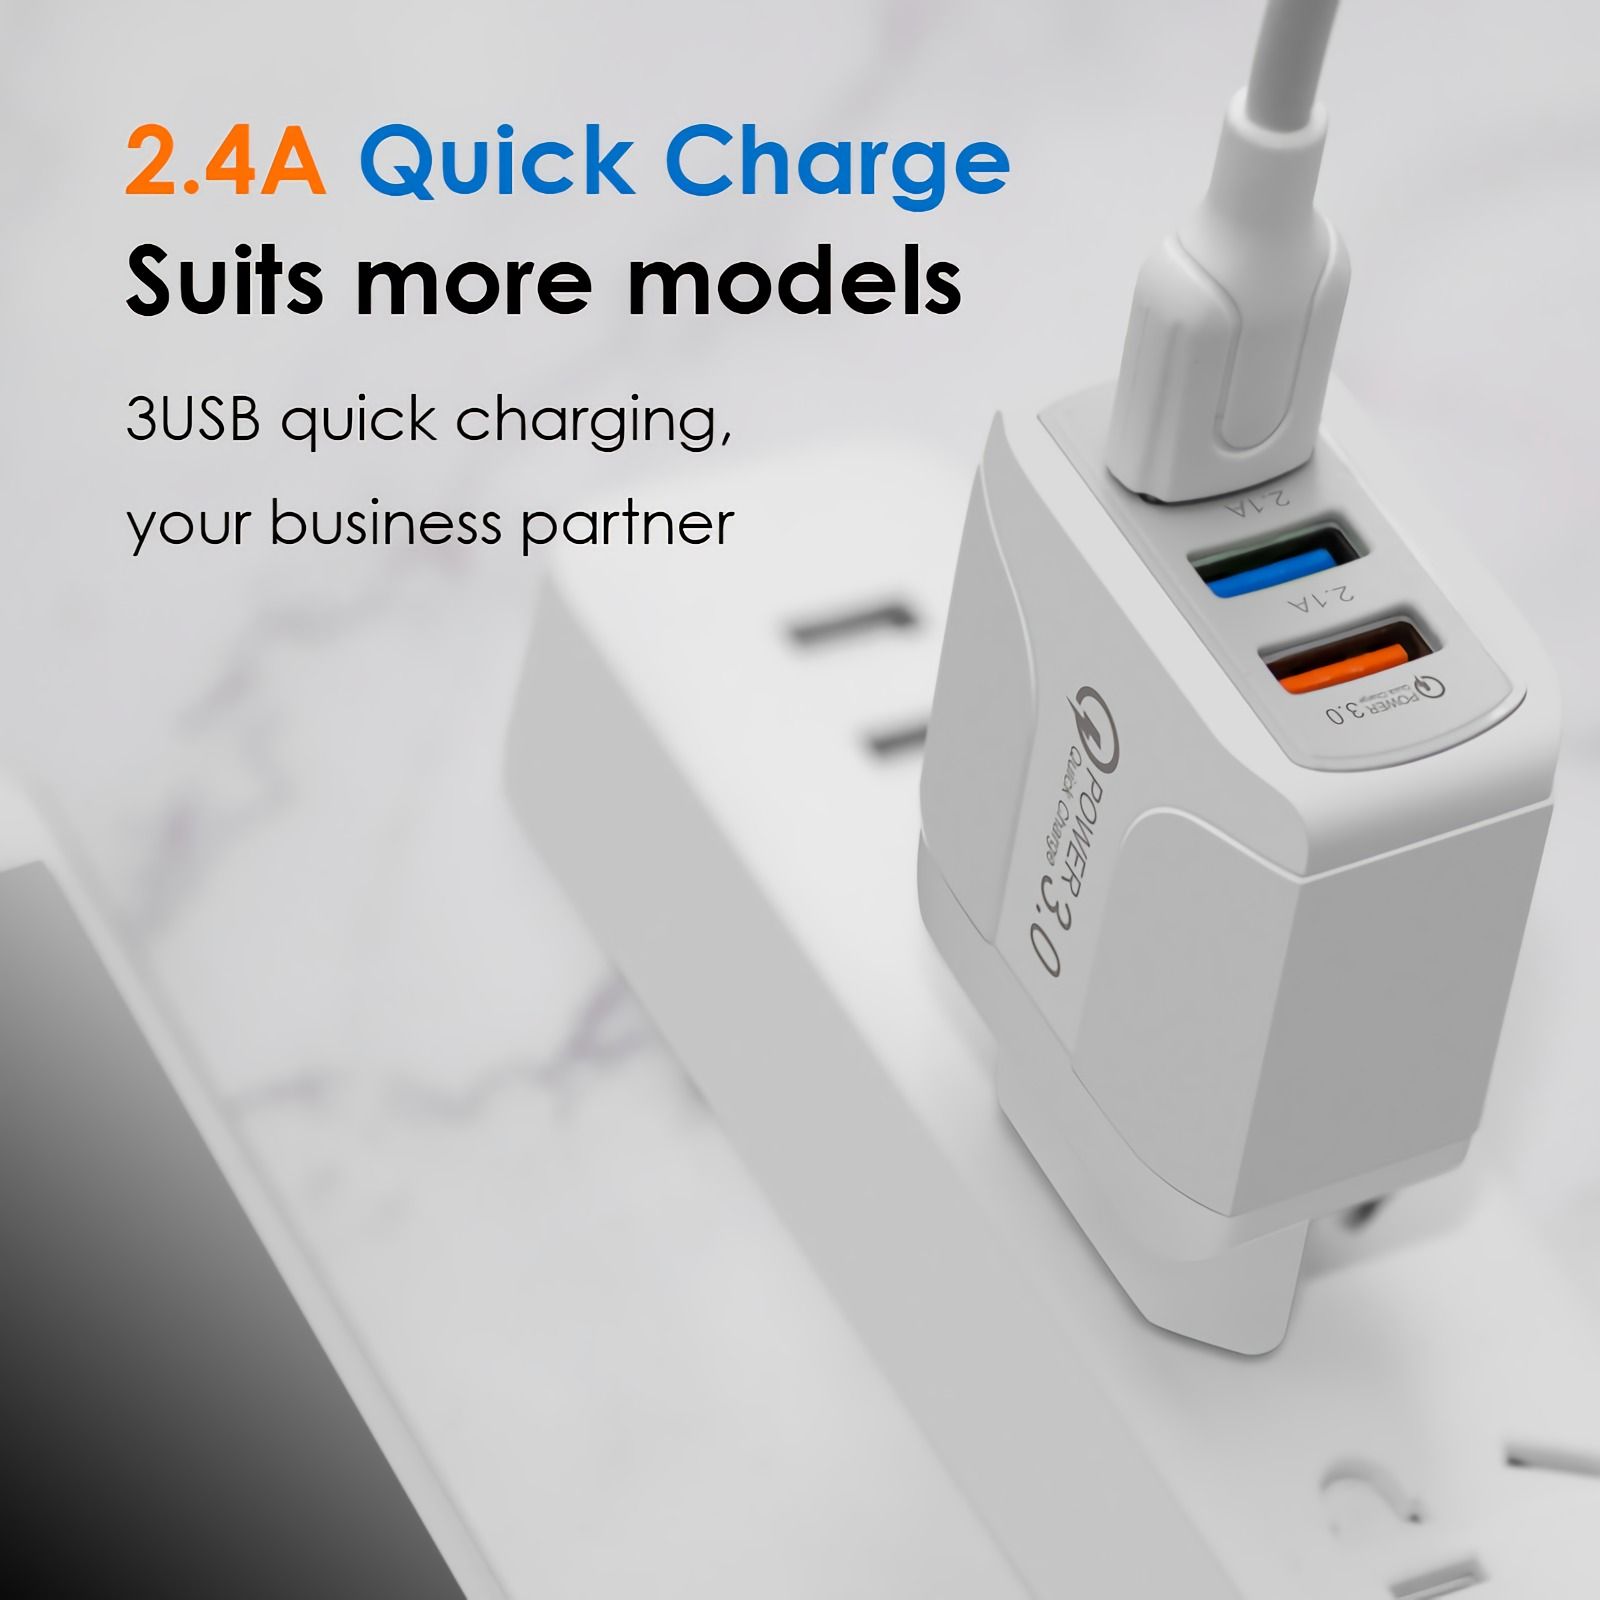 5V21A-Laptop-Charger-3USB-Quick-Charger-Fast-Charger-Travel-Charger-1700468